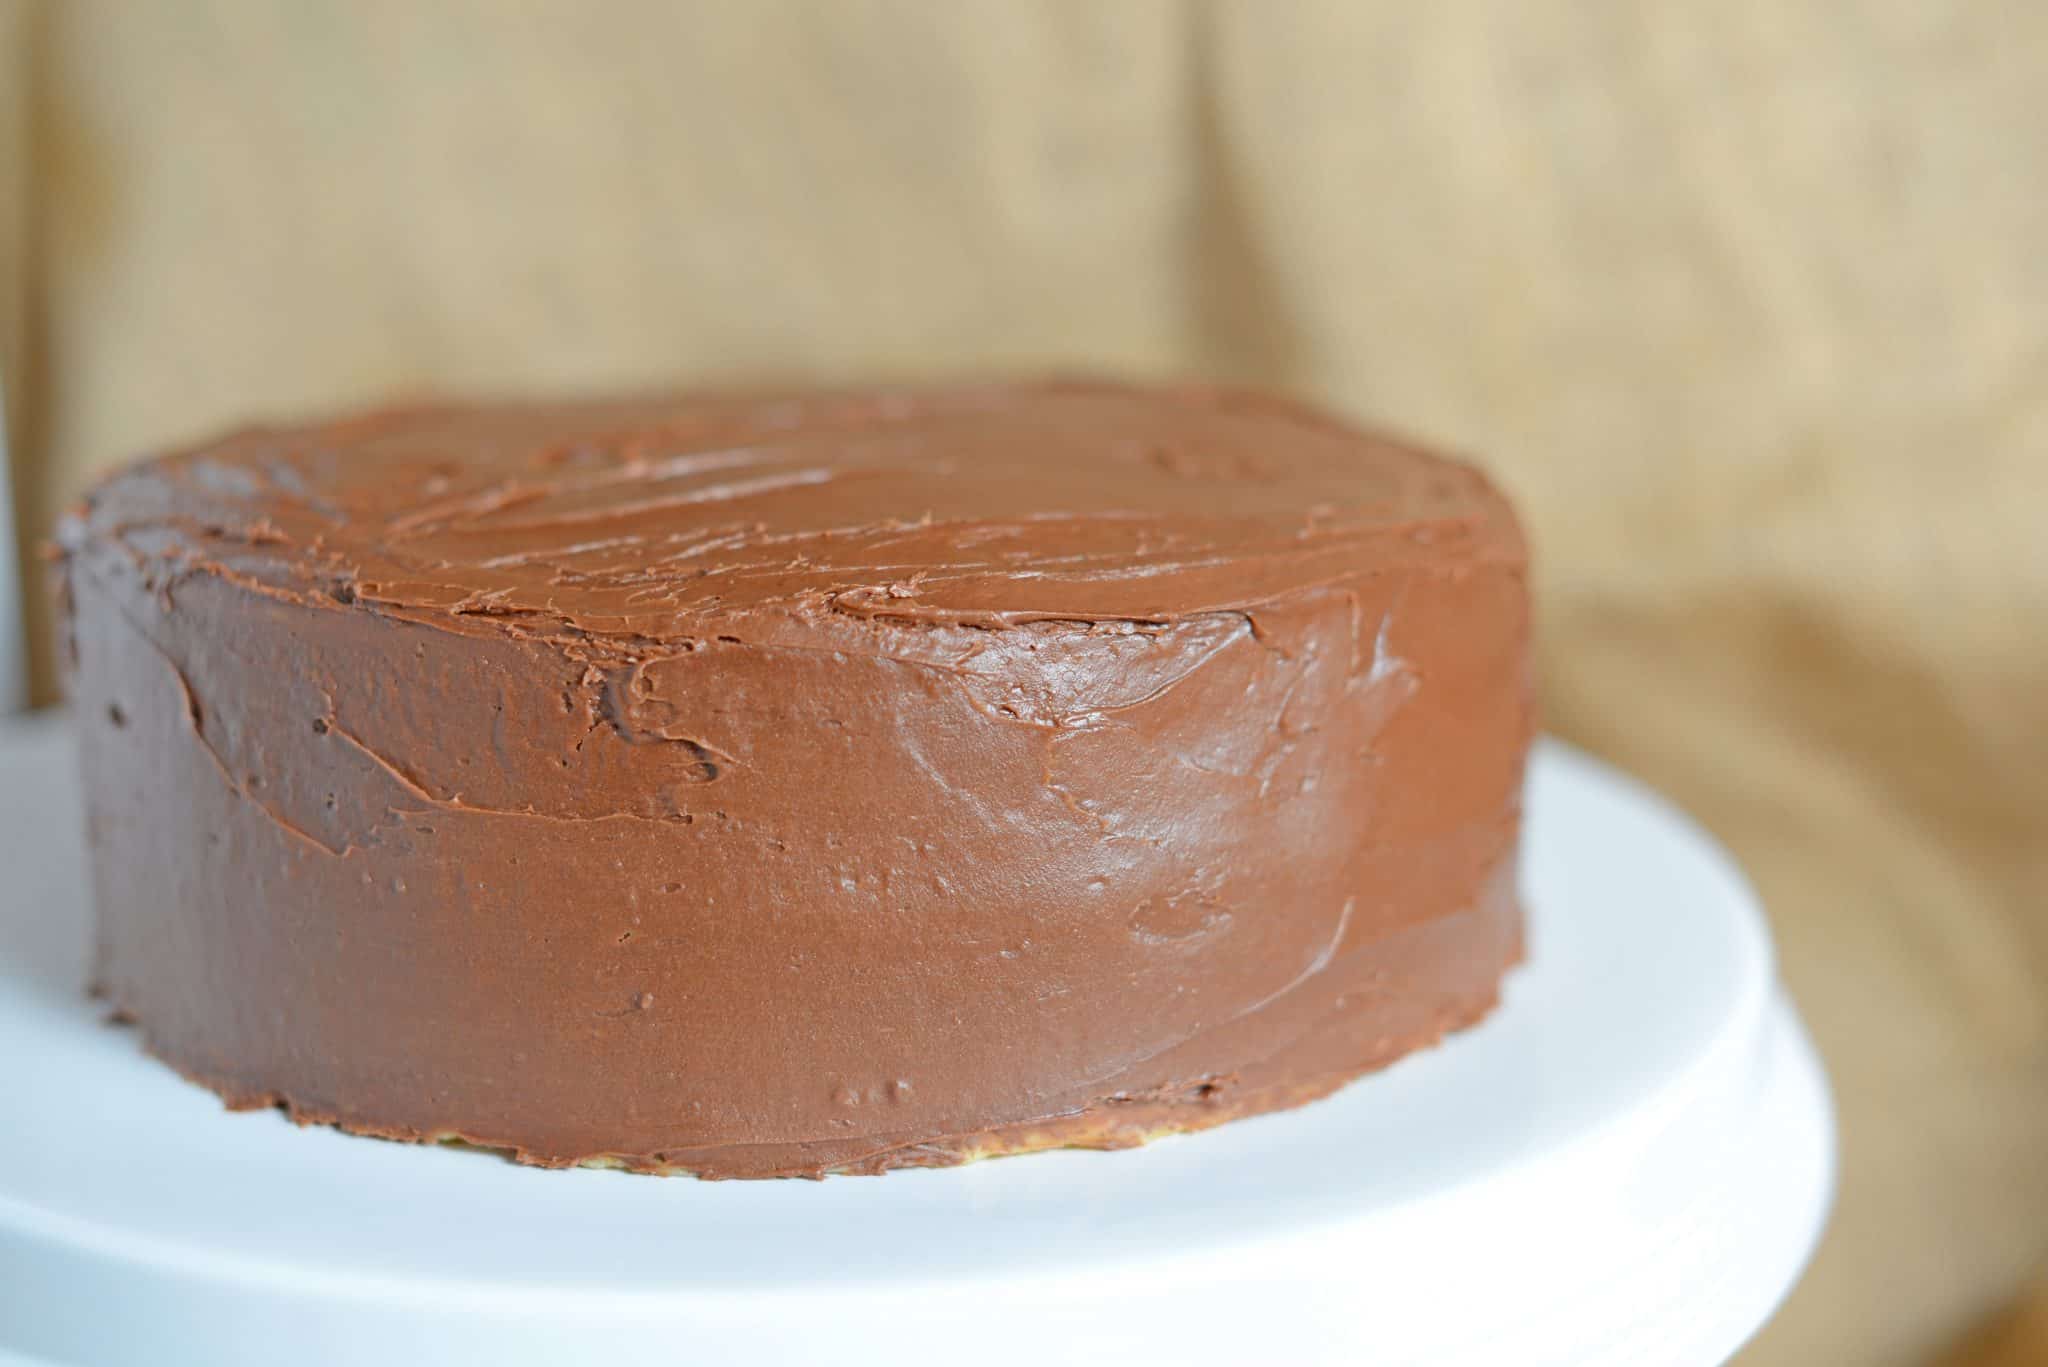 Brown Butter Cake is an easy cake made from scratch using delicious brown butter, chocolate mousse filling and chocolate buttercream frosting. #brownbuttercake #layercakerecipes www.savoryexperiments.com